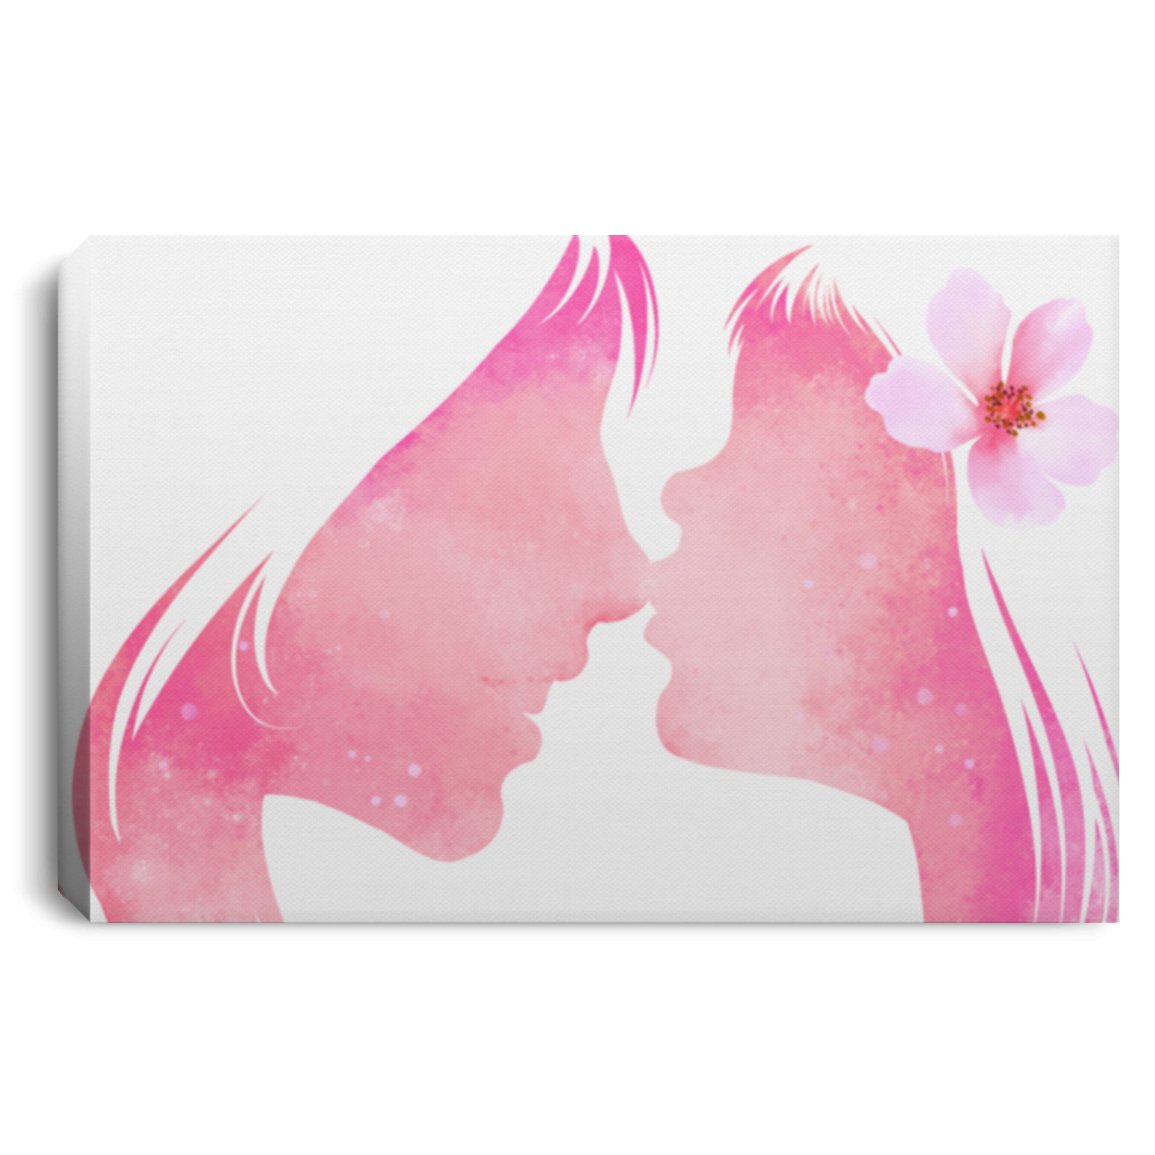 Living in Color Love Mommy & Daughter Collection - Sweet Sentimental GiftsLiving in Color Love Mommy & Daughter CollectionWall ArtCustomCatSweet Sentimental Gifts1215-12660-101751858-57145Living in Color Love Mommy & Daughter Collection12" x 8"WhiteMy Mommy...KissUS108392435NaN